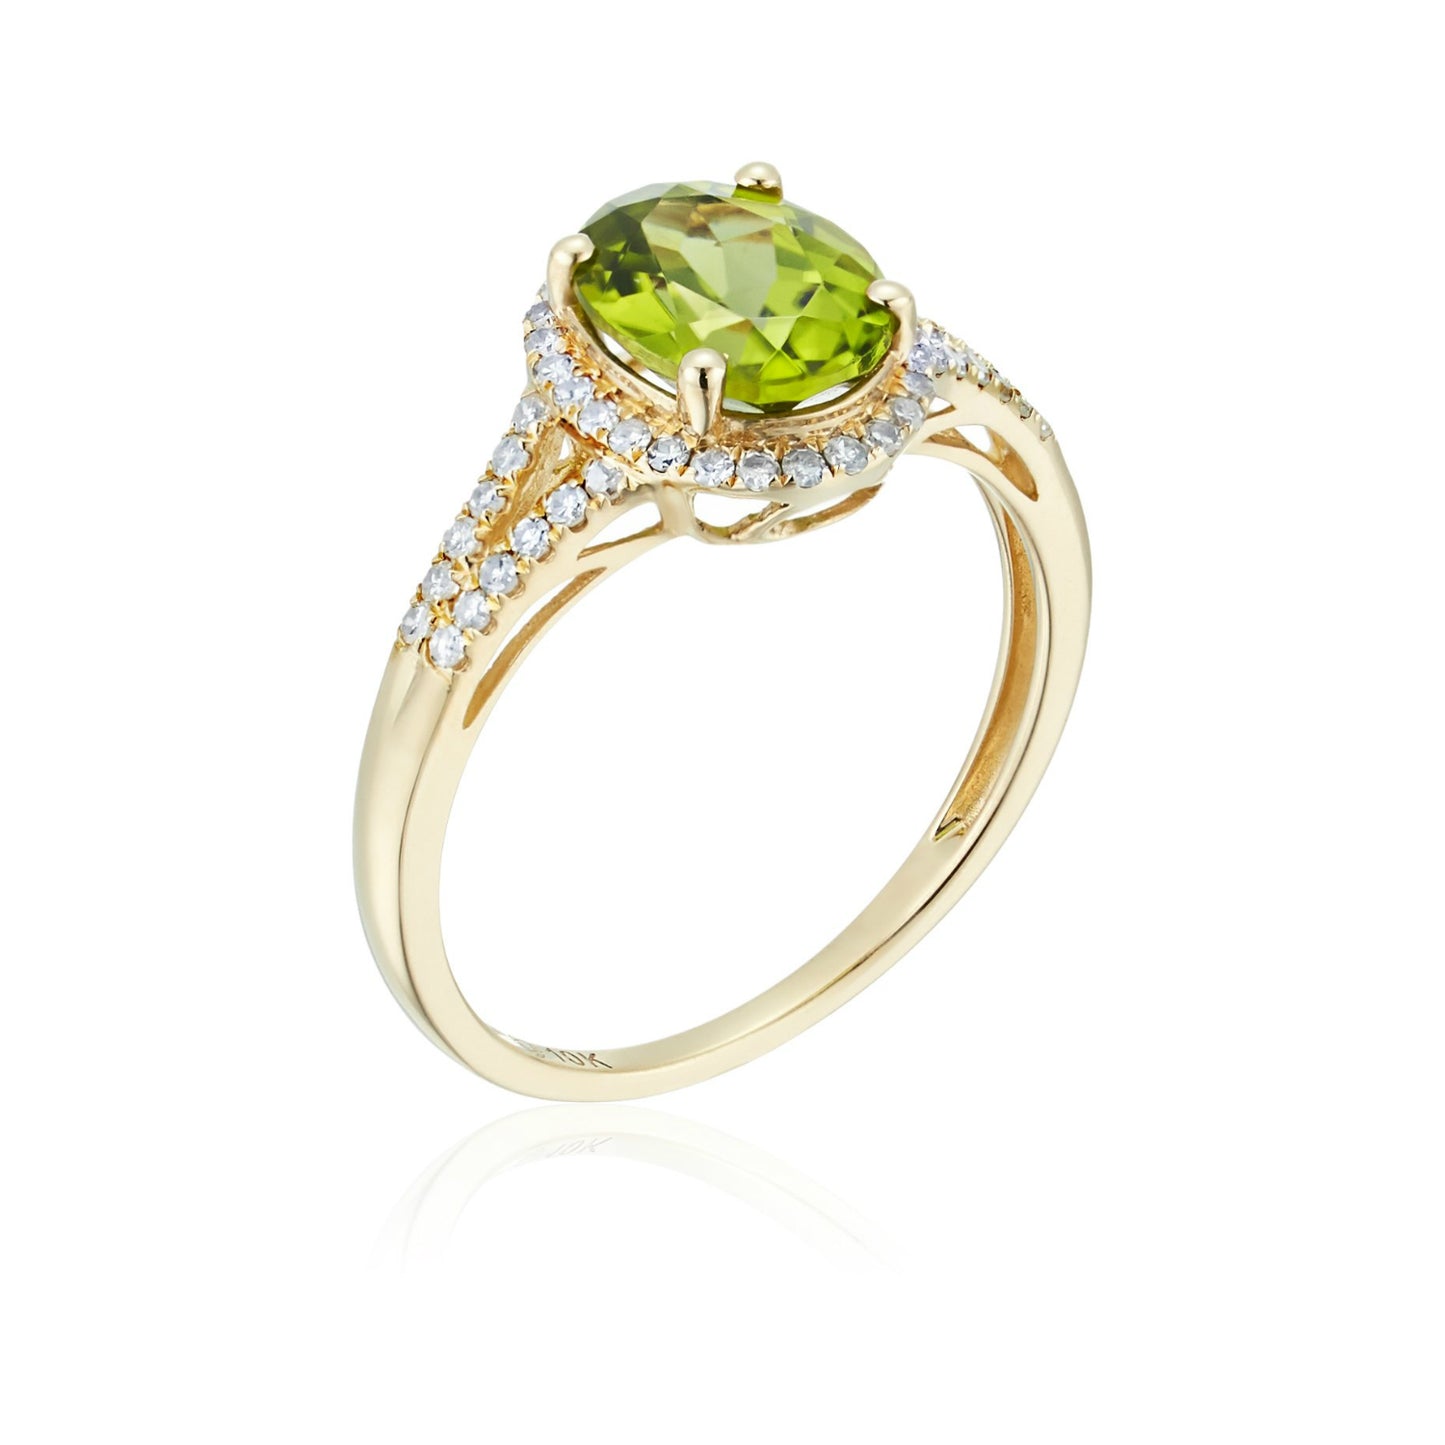 10k Yellow Gold Peridot and Diamond Oval Halo Engagement Ring (1/5cttw, H-I Color, I1-I2 Clarity), - pinctore